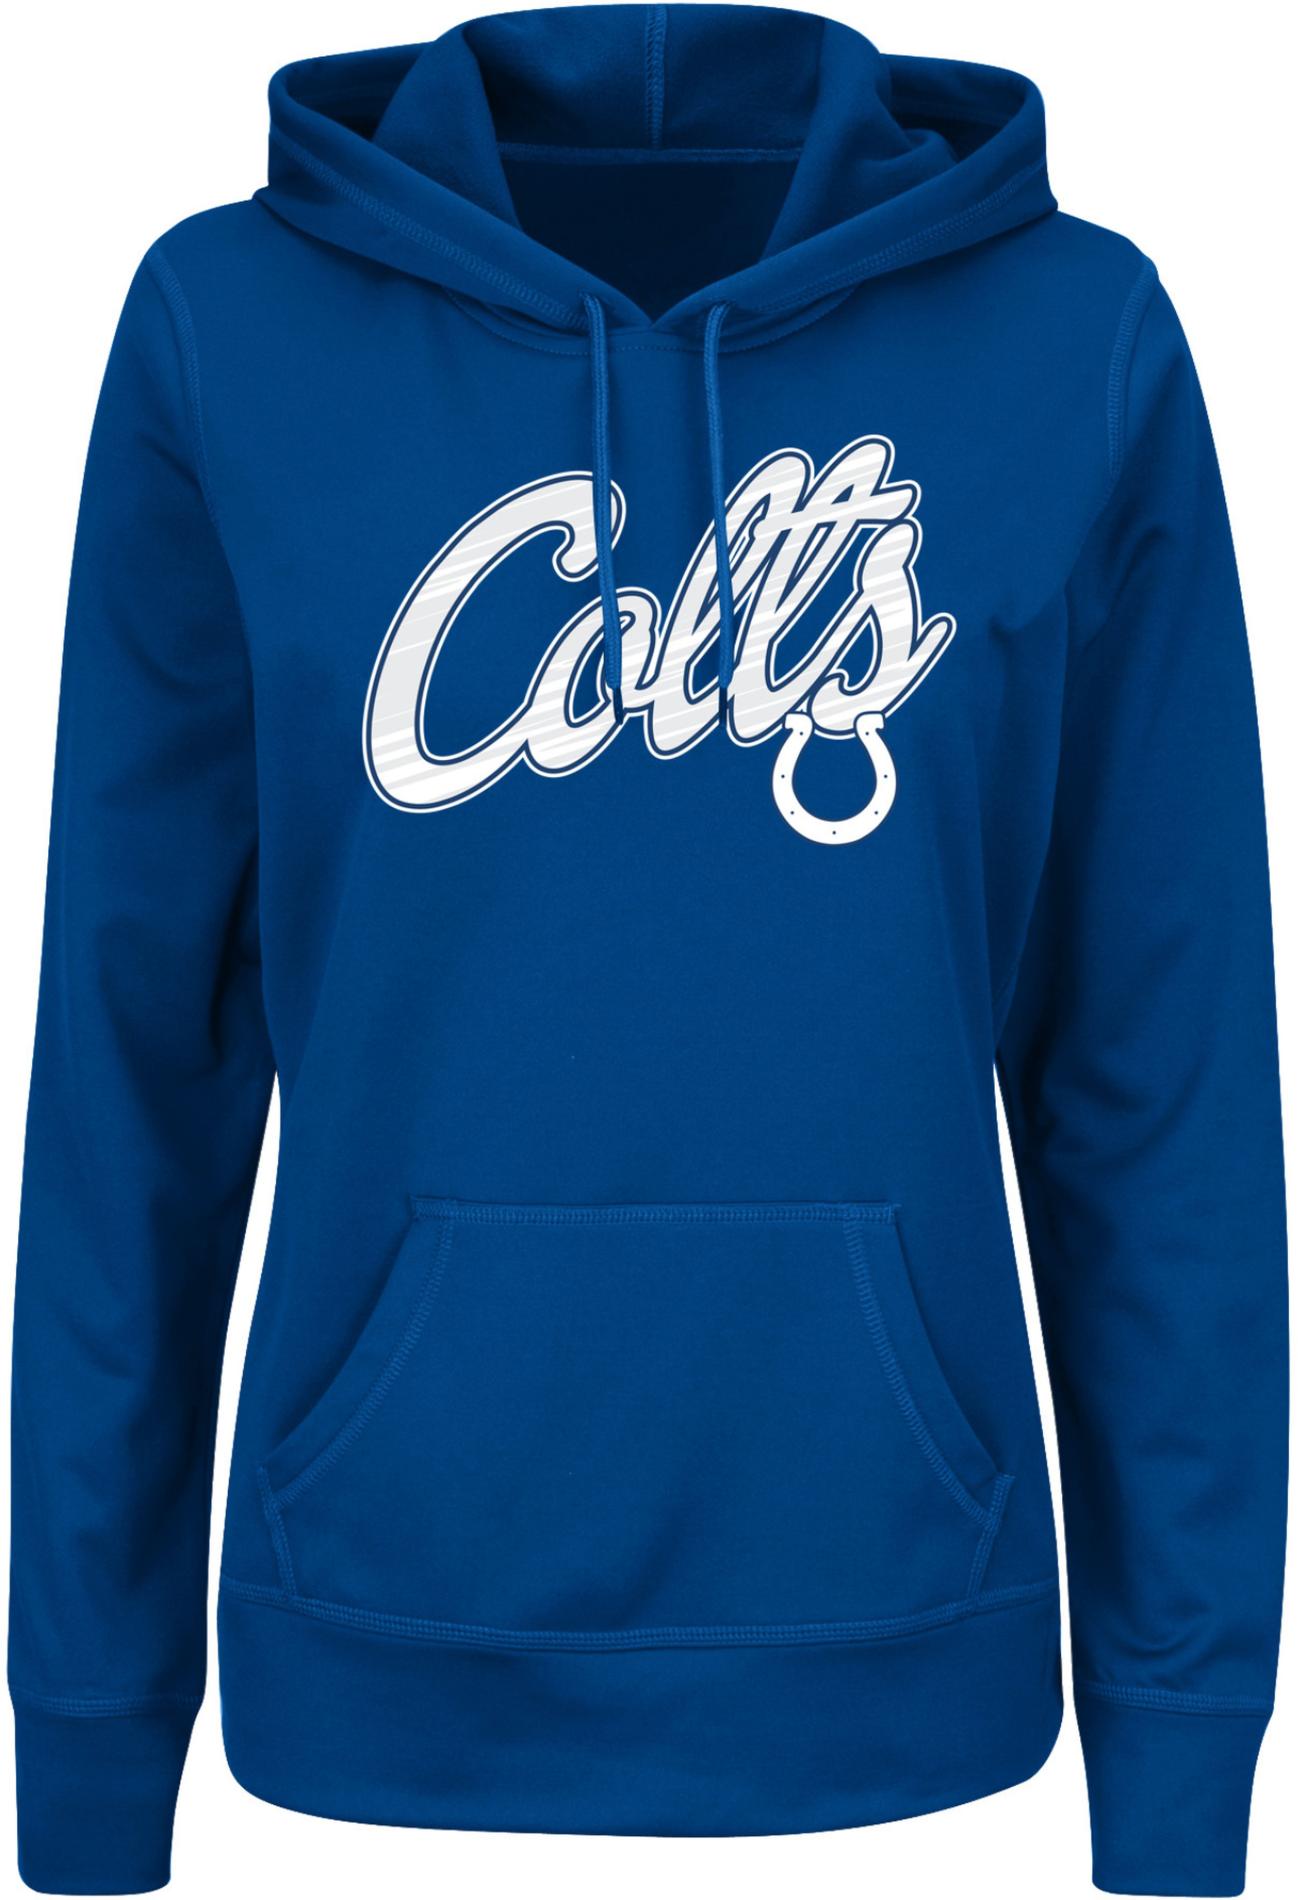 NFL Women's Hoodie - Indianapolis Colts